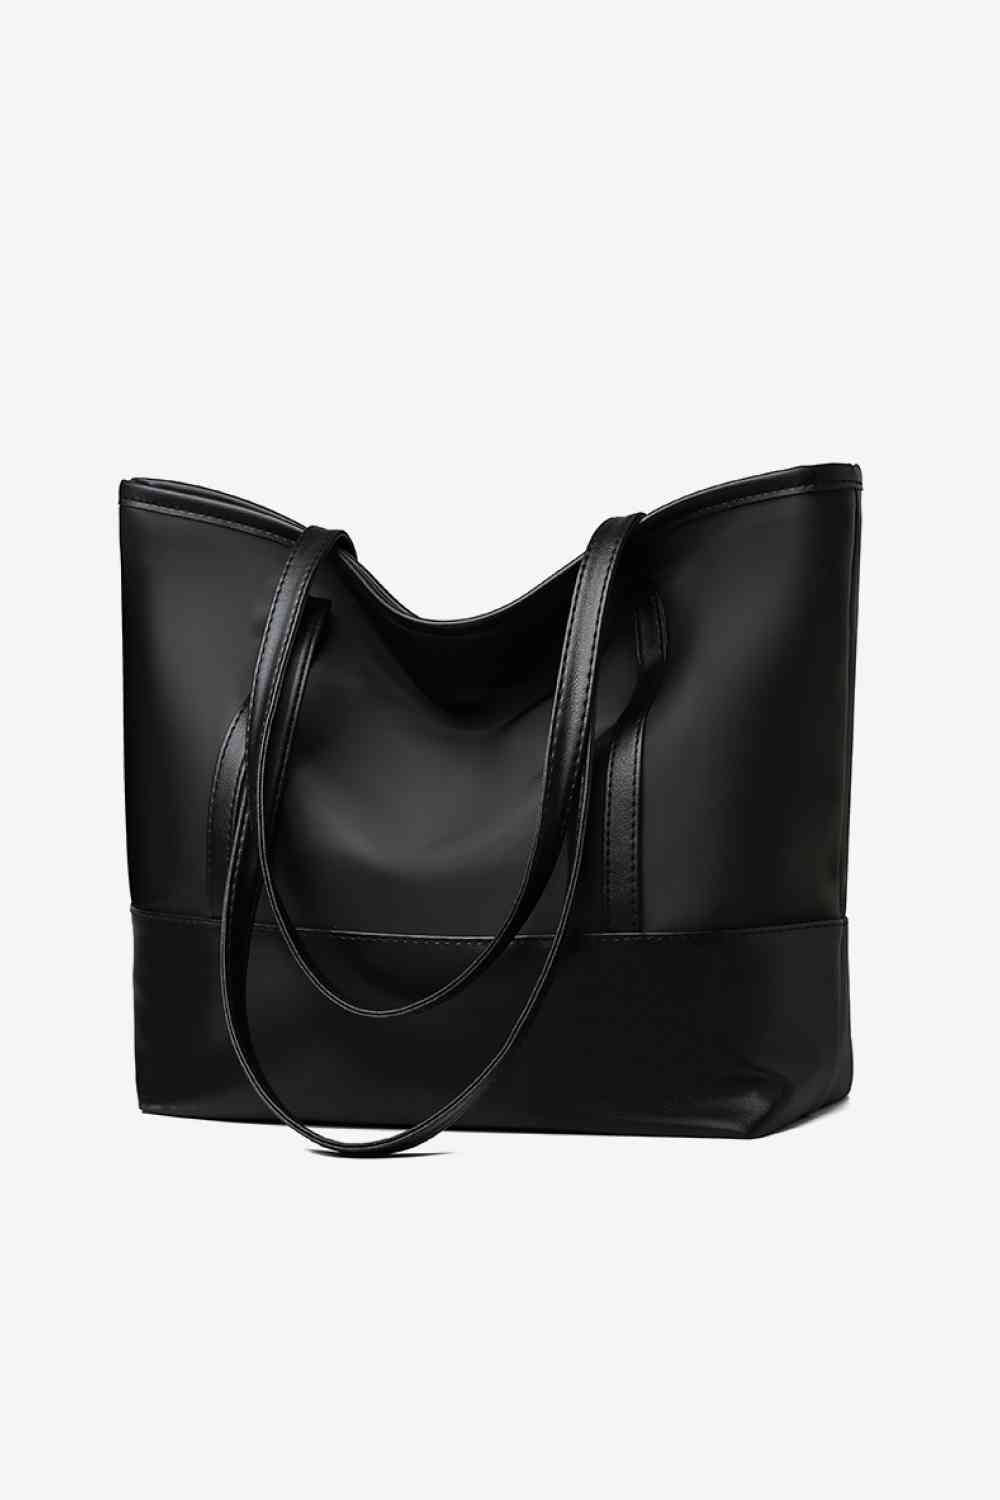 Obsidian Forest Vegan Leather Tote Bag | Hypoallergenic - Allergy Friendly - Naturally Free